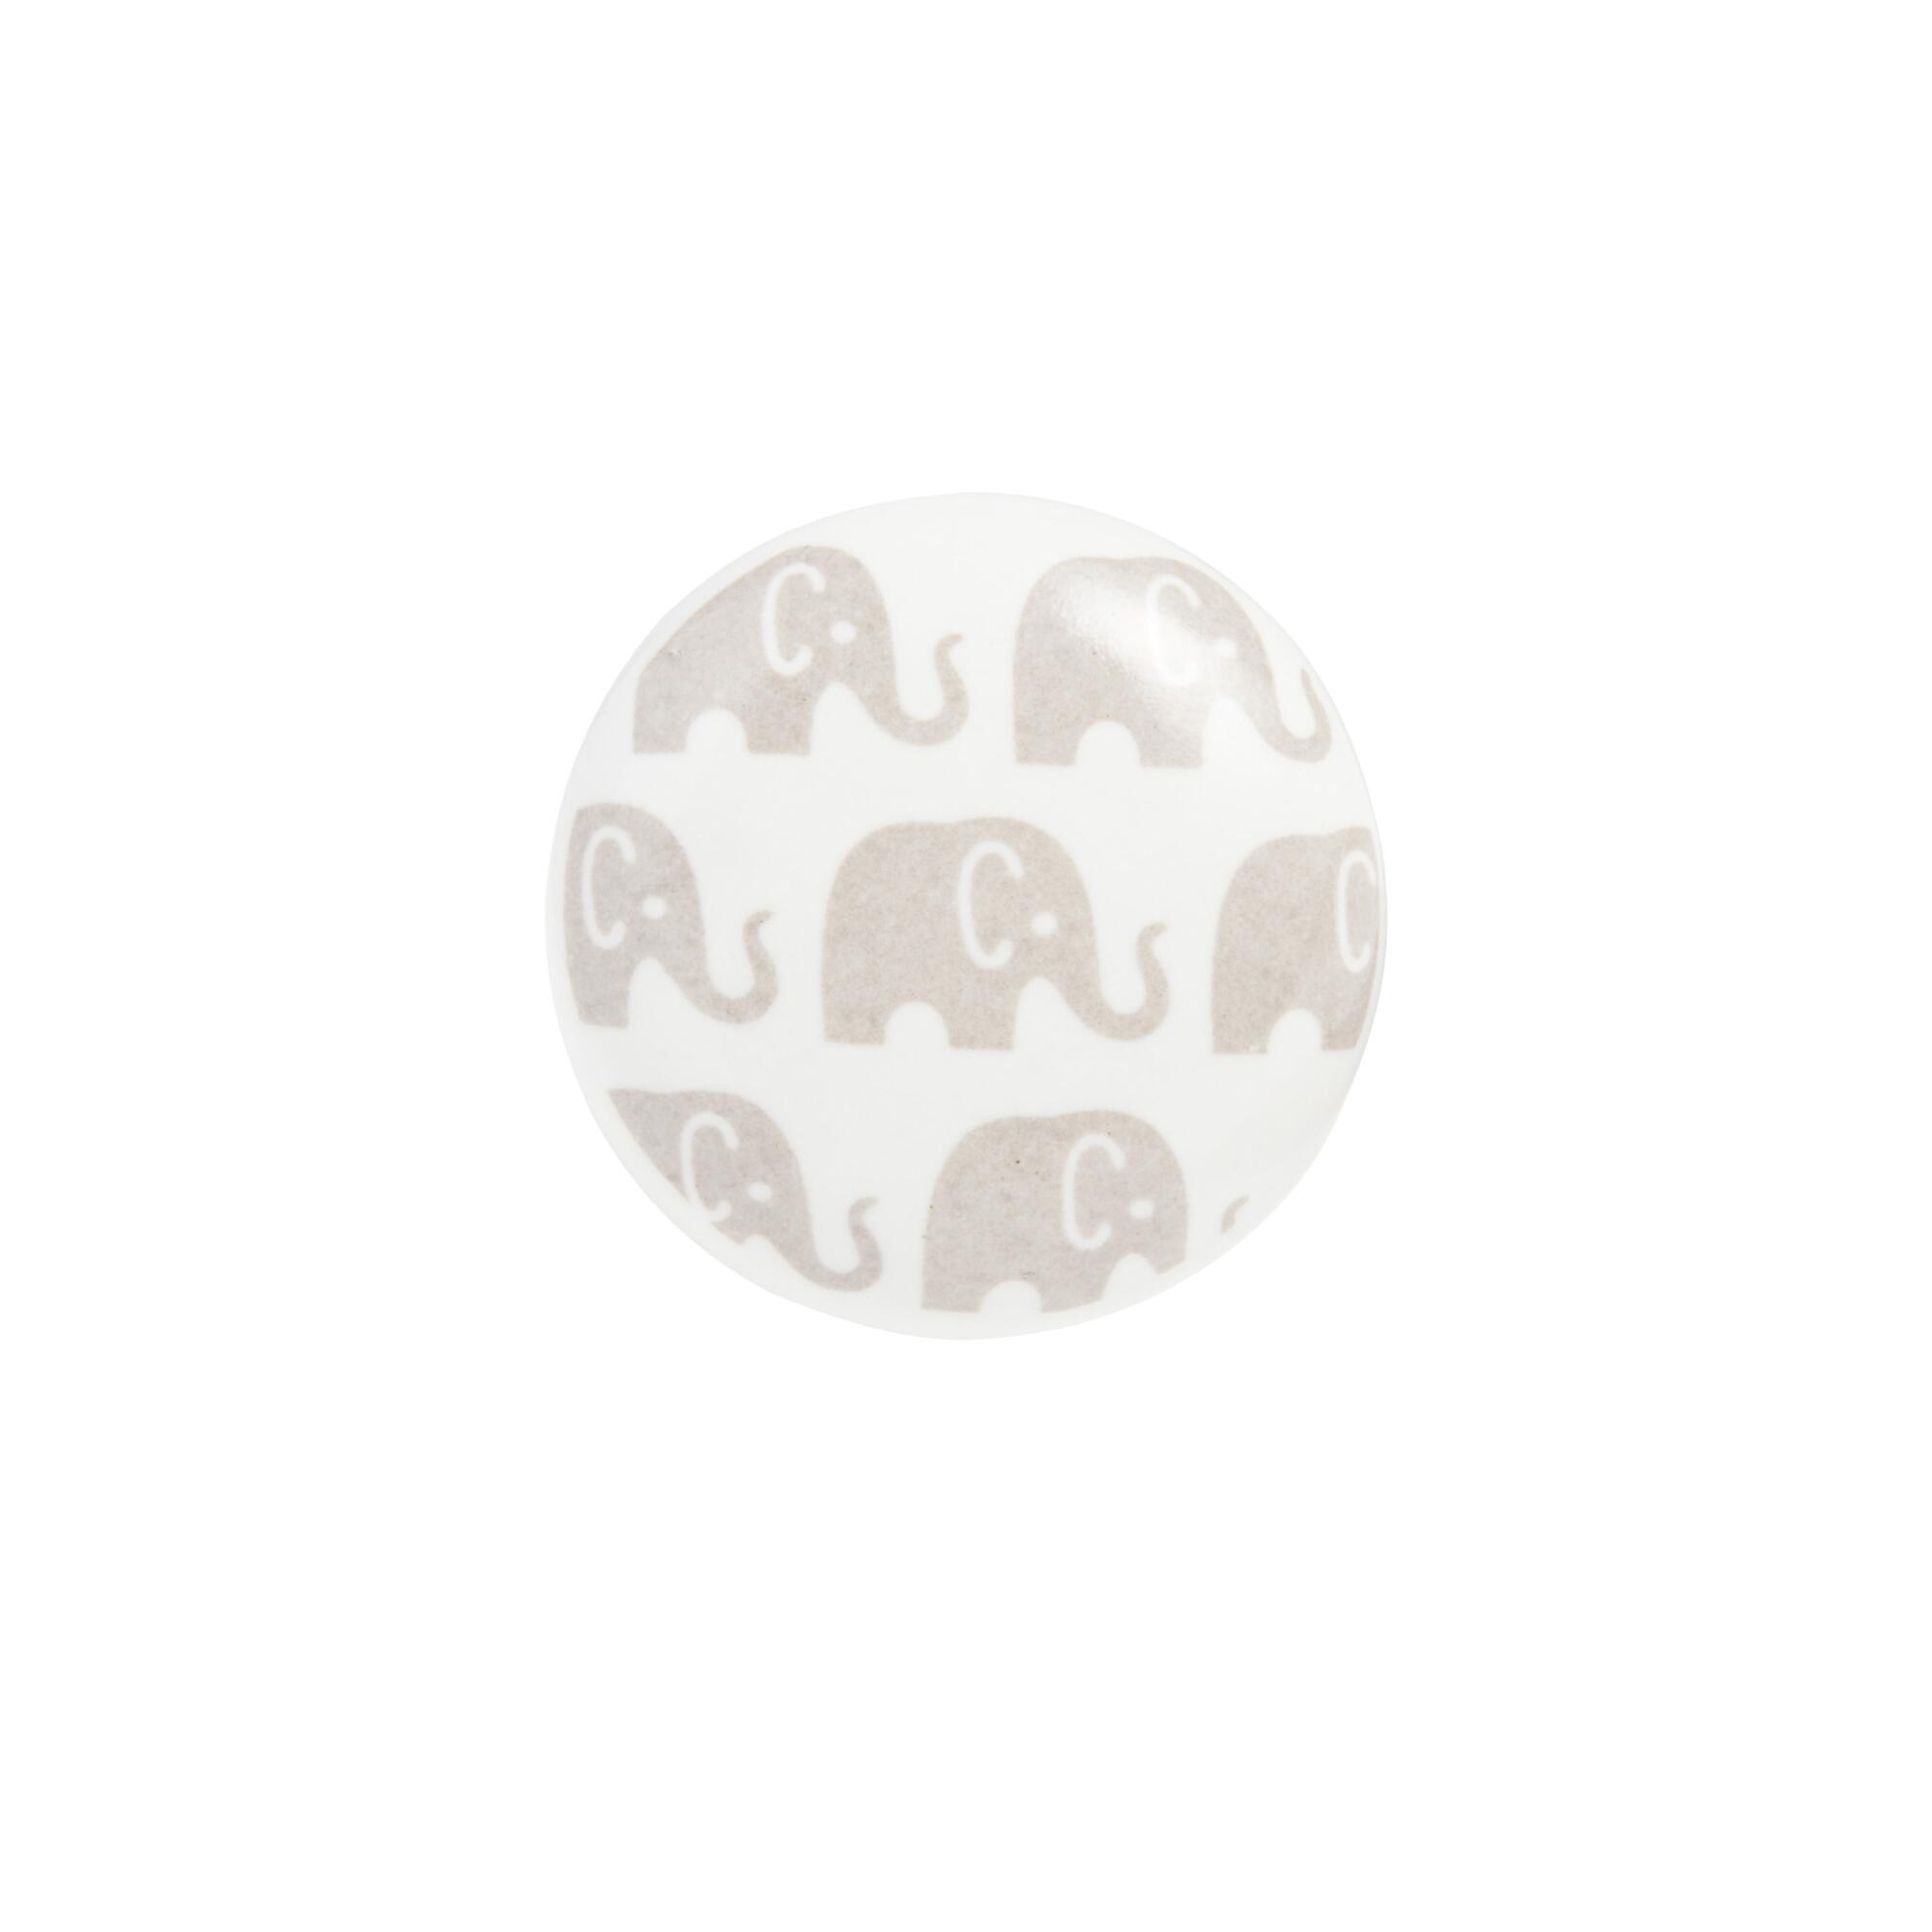 White And Gray Ceramic Elephant Knobs 4 Pack: Gray/White by World Market